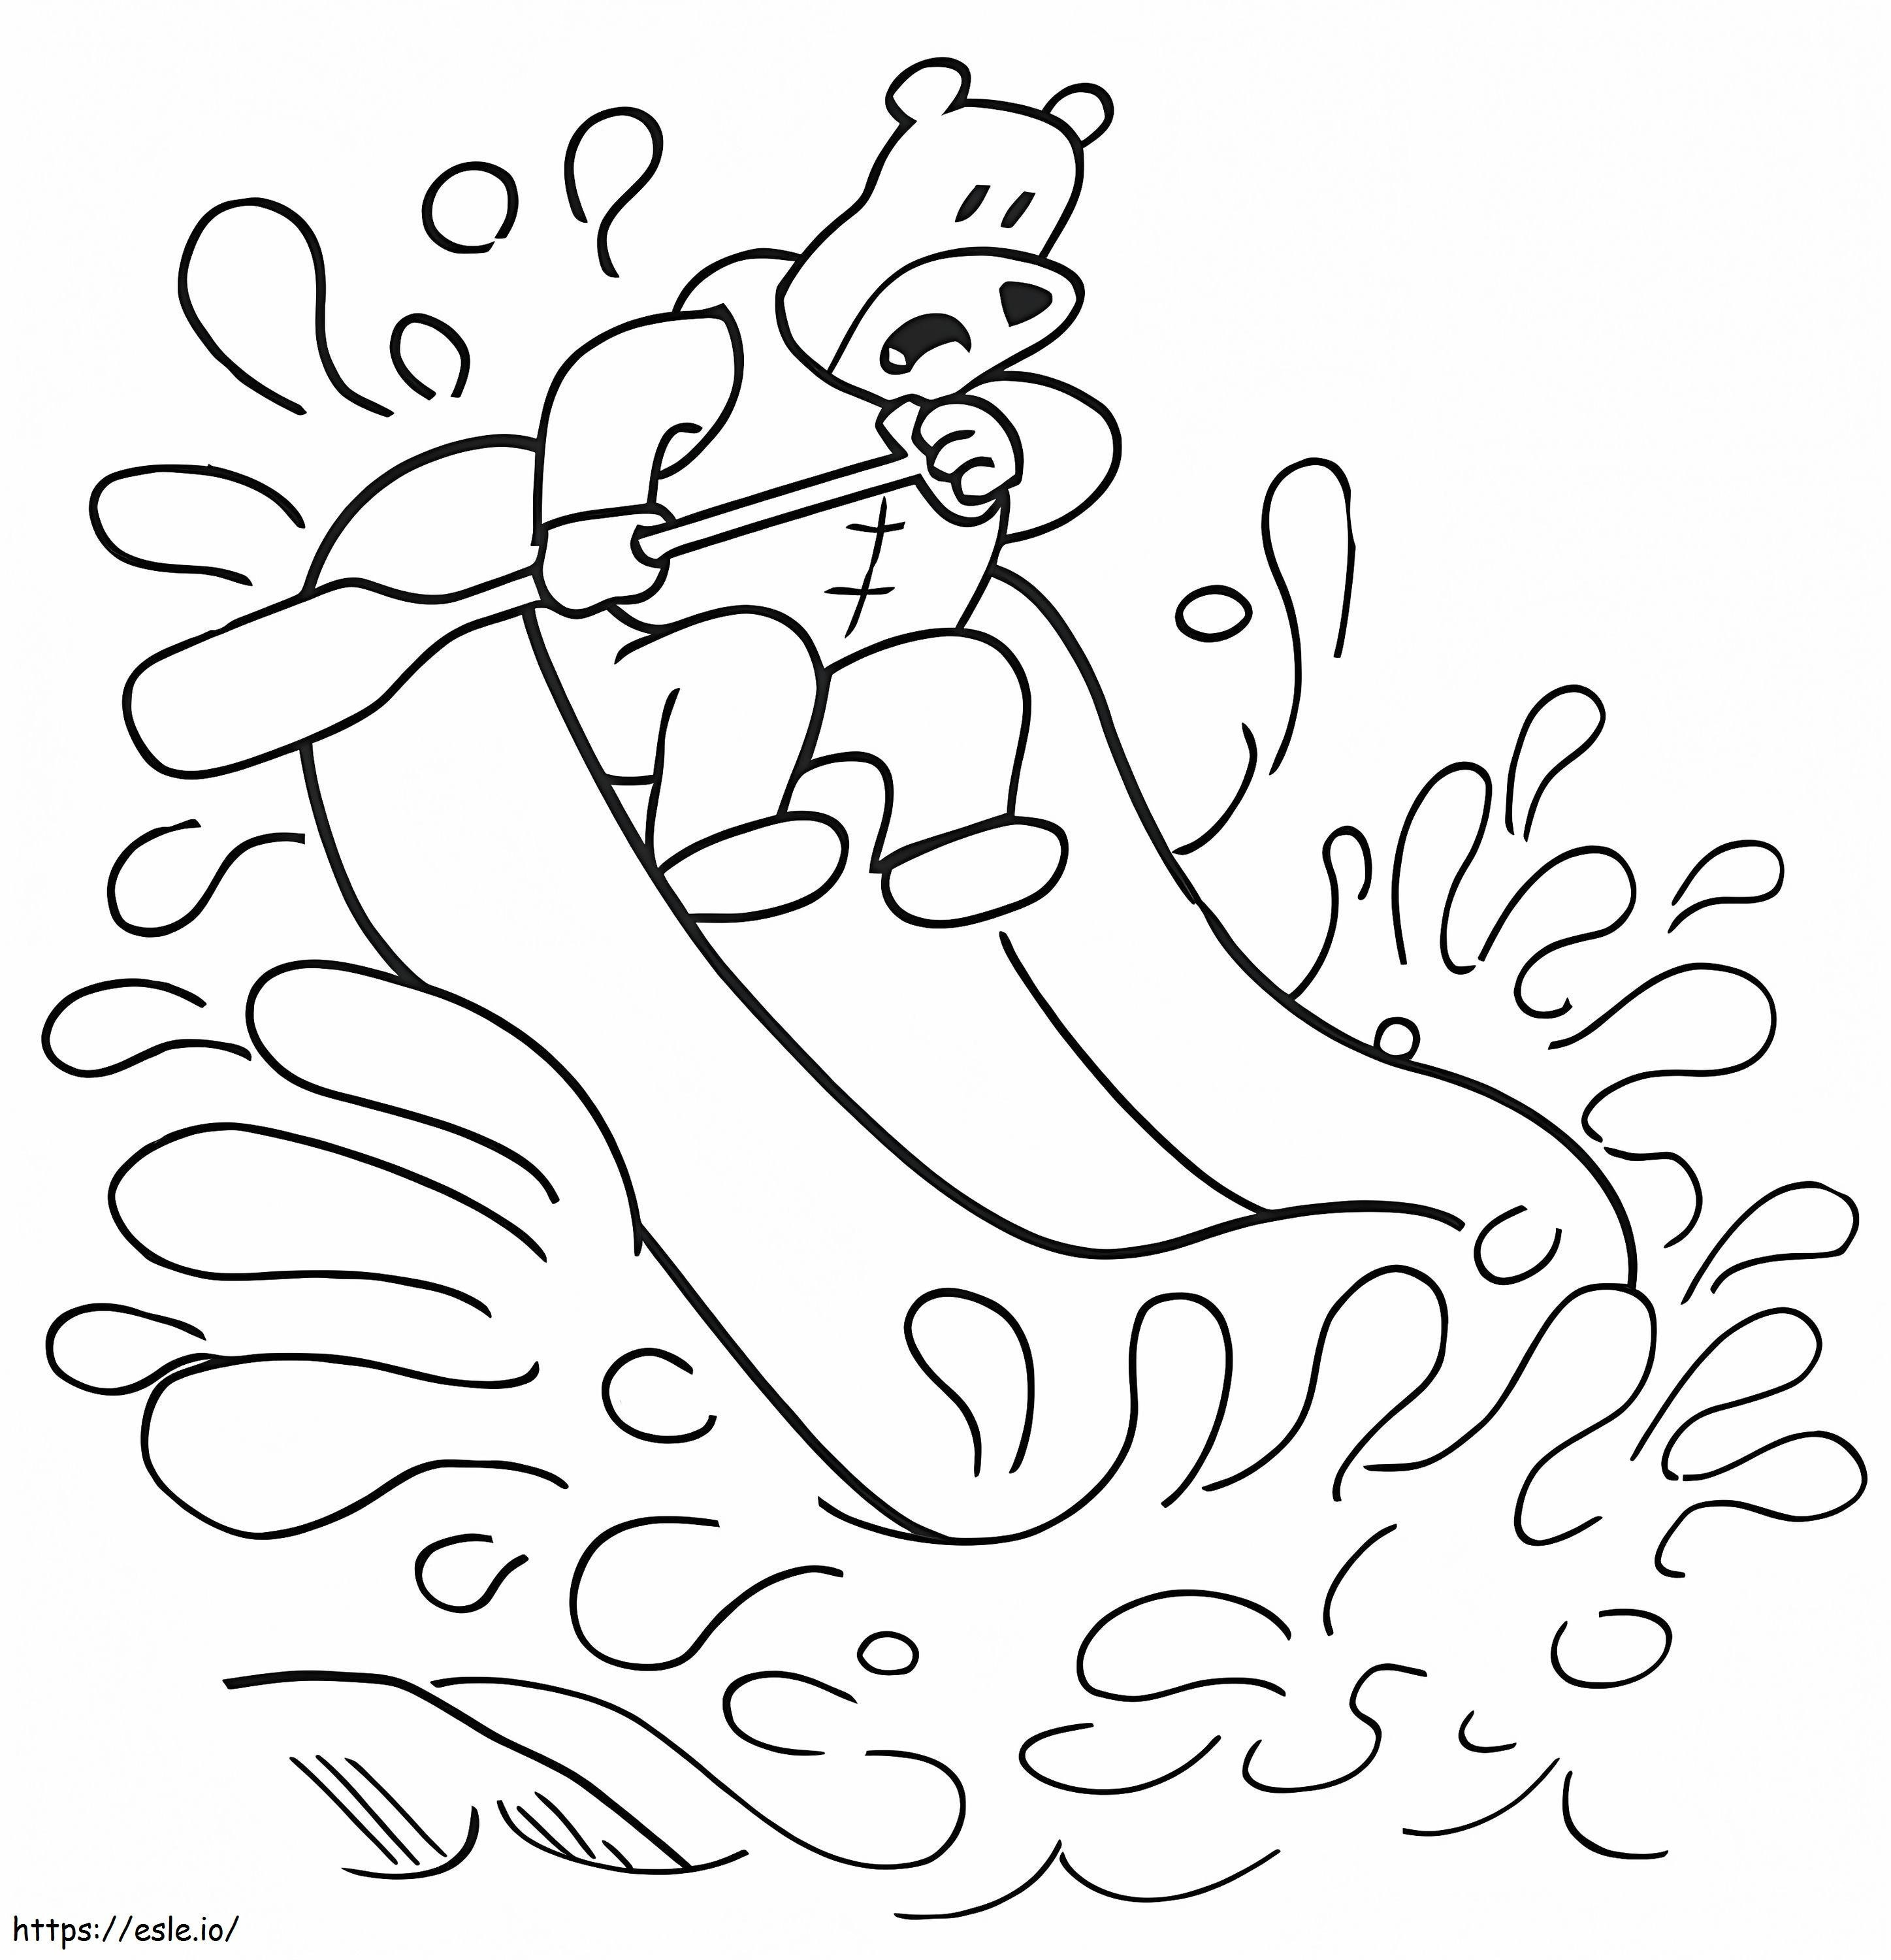 A Bear On Raft coloring page